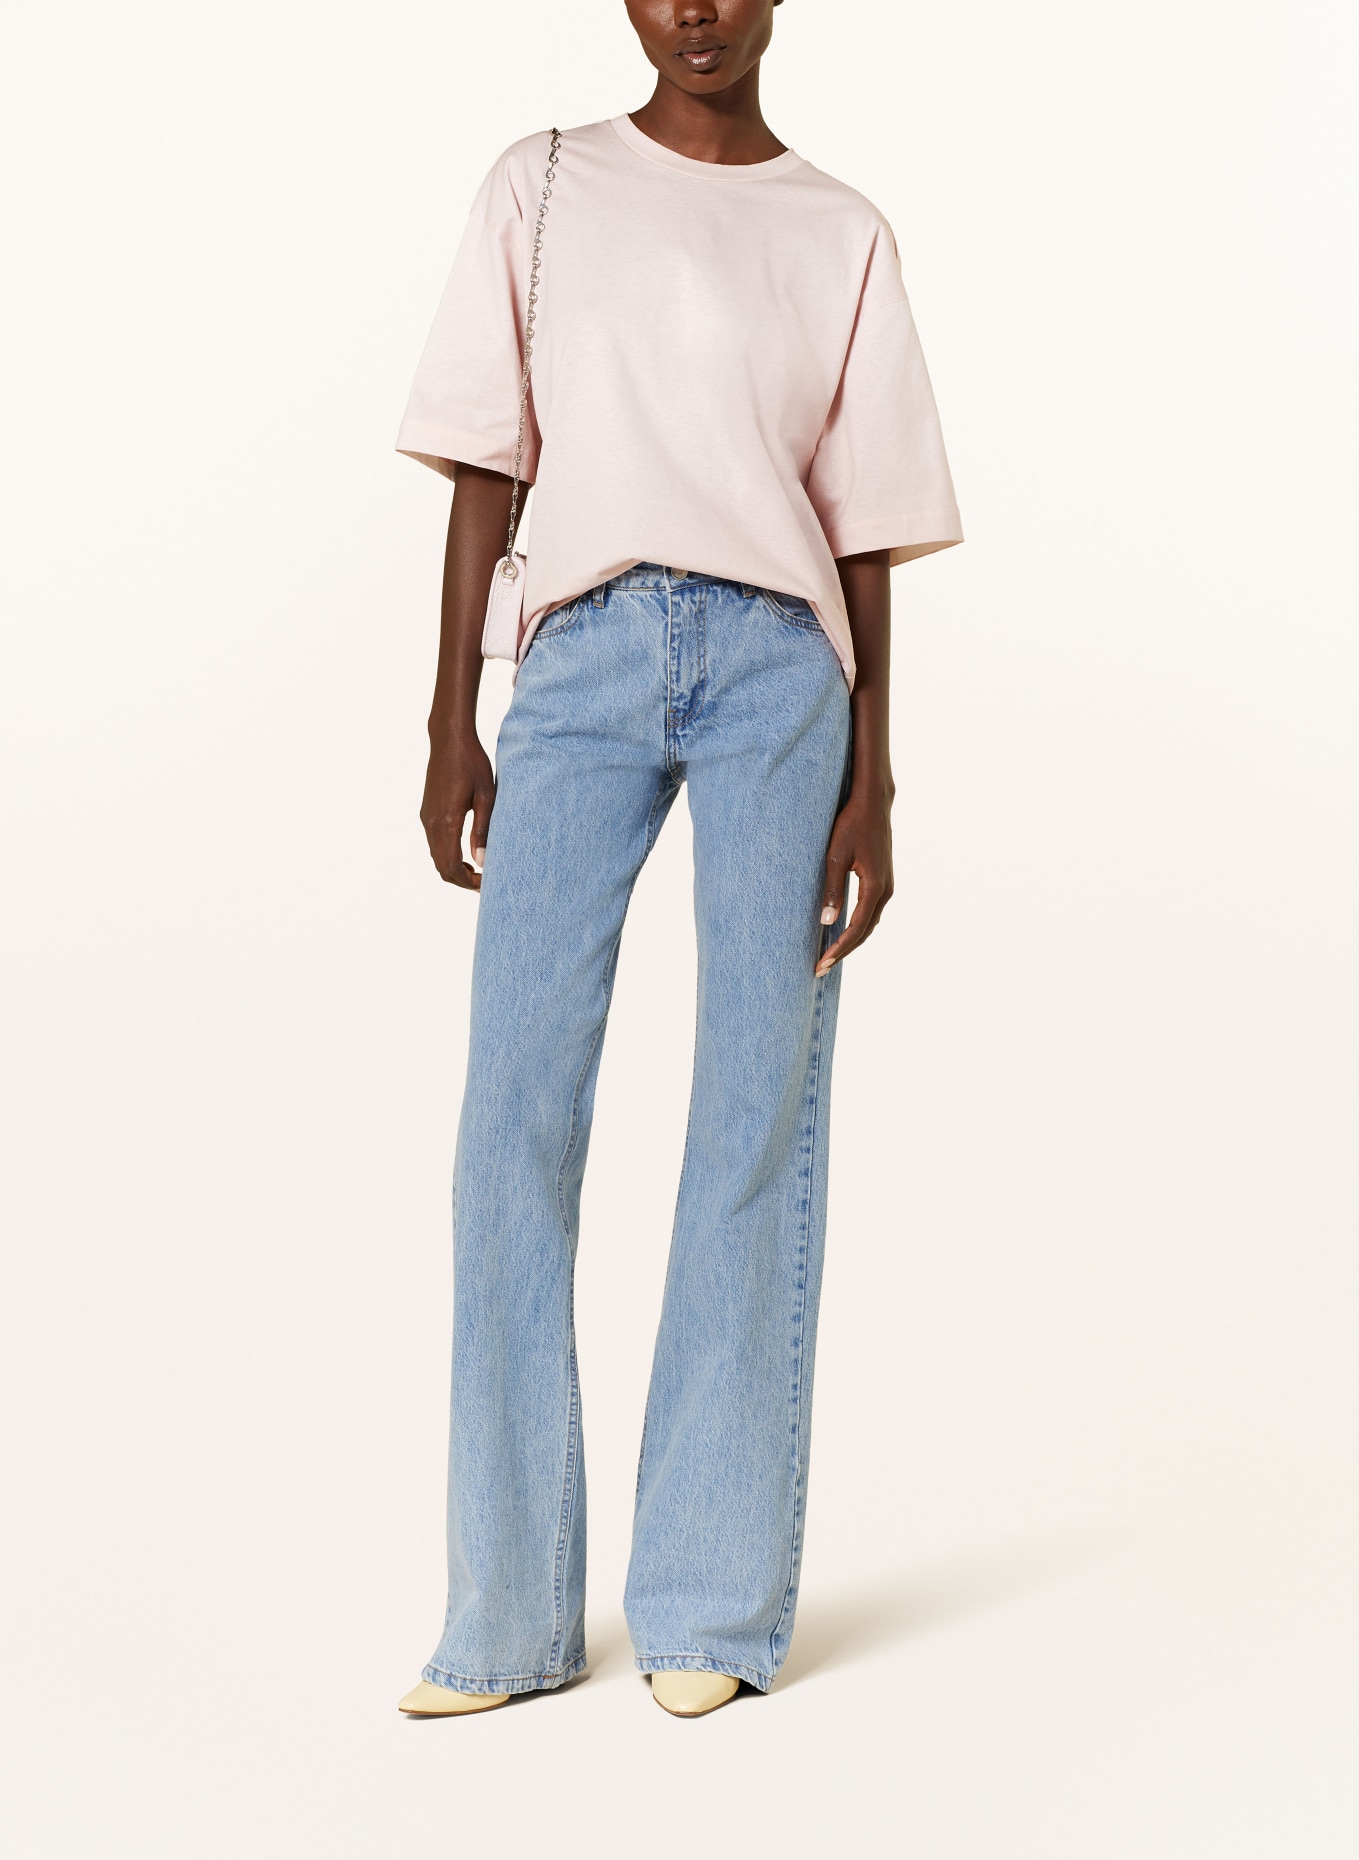 BURBERRY Cropped-Shirt MILLEPOINT, Farbe: ROSA (Bild 2)